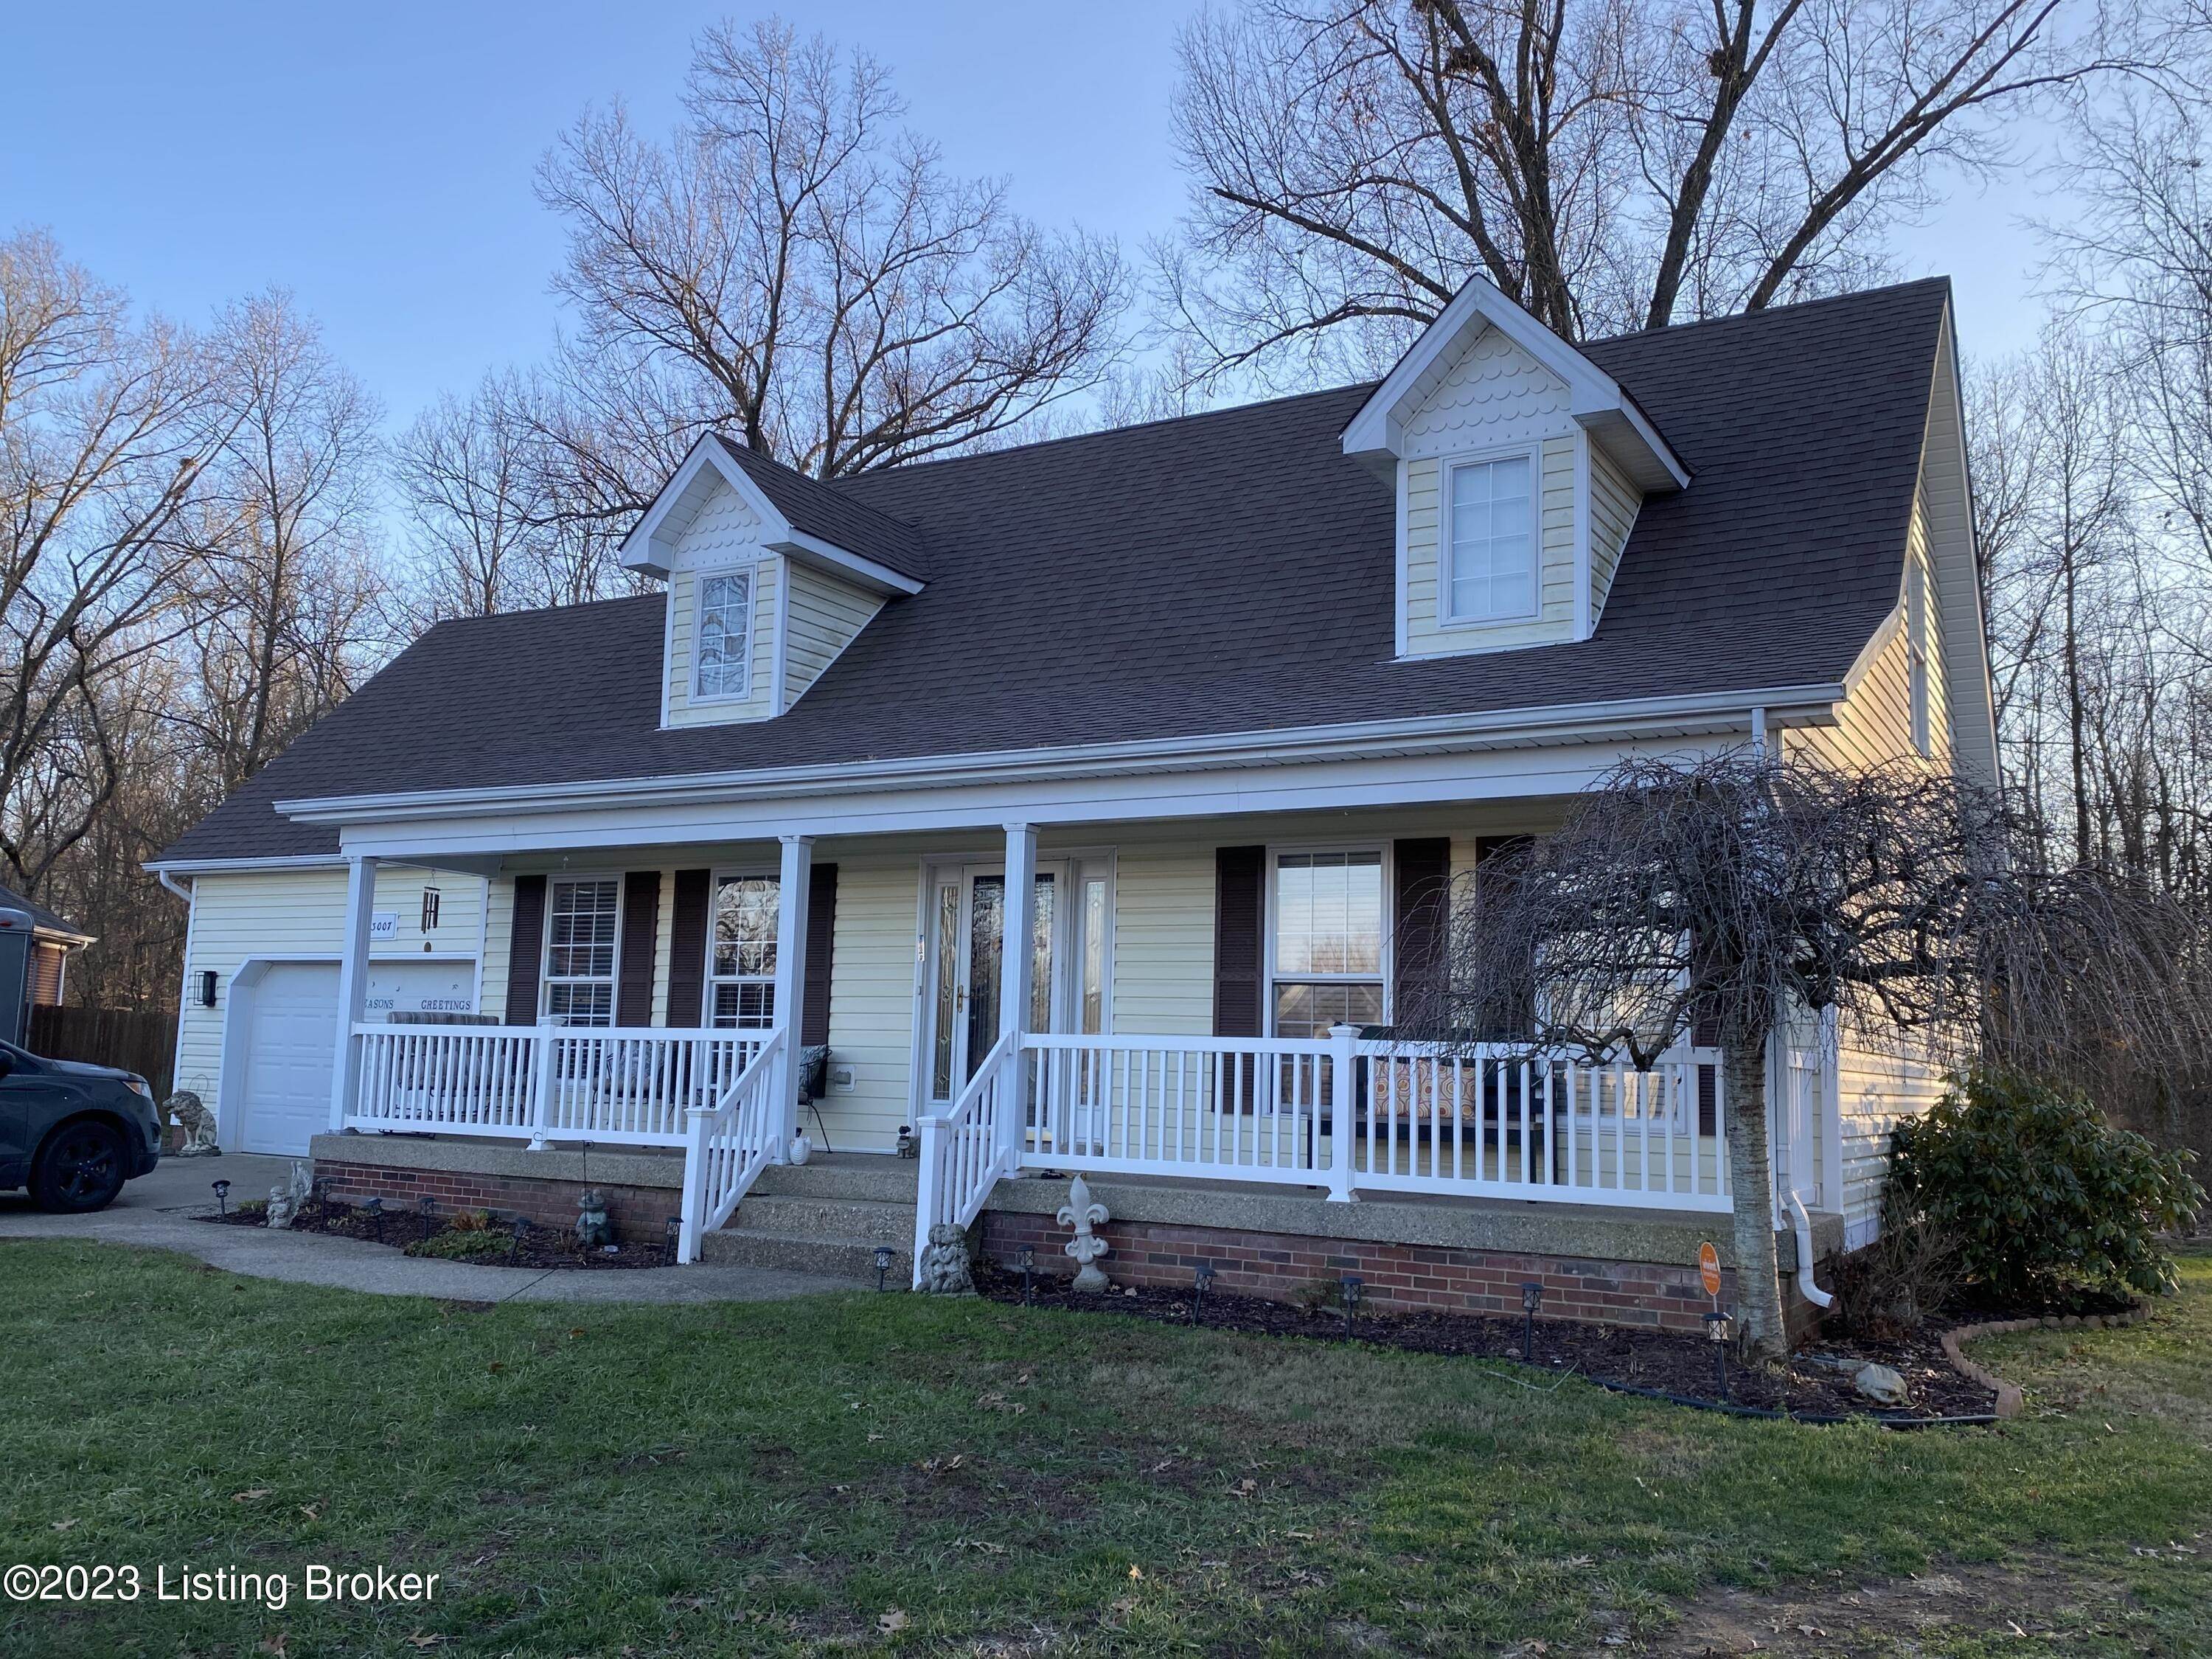 16. Single Family at Louisville, KY 40272